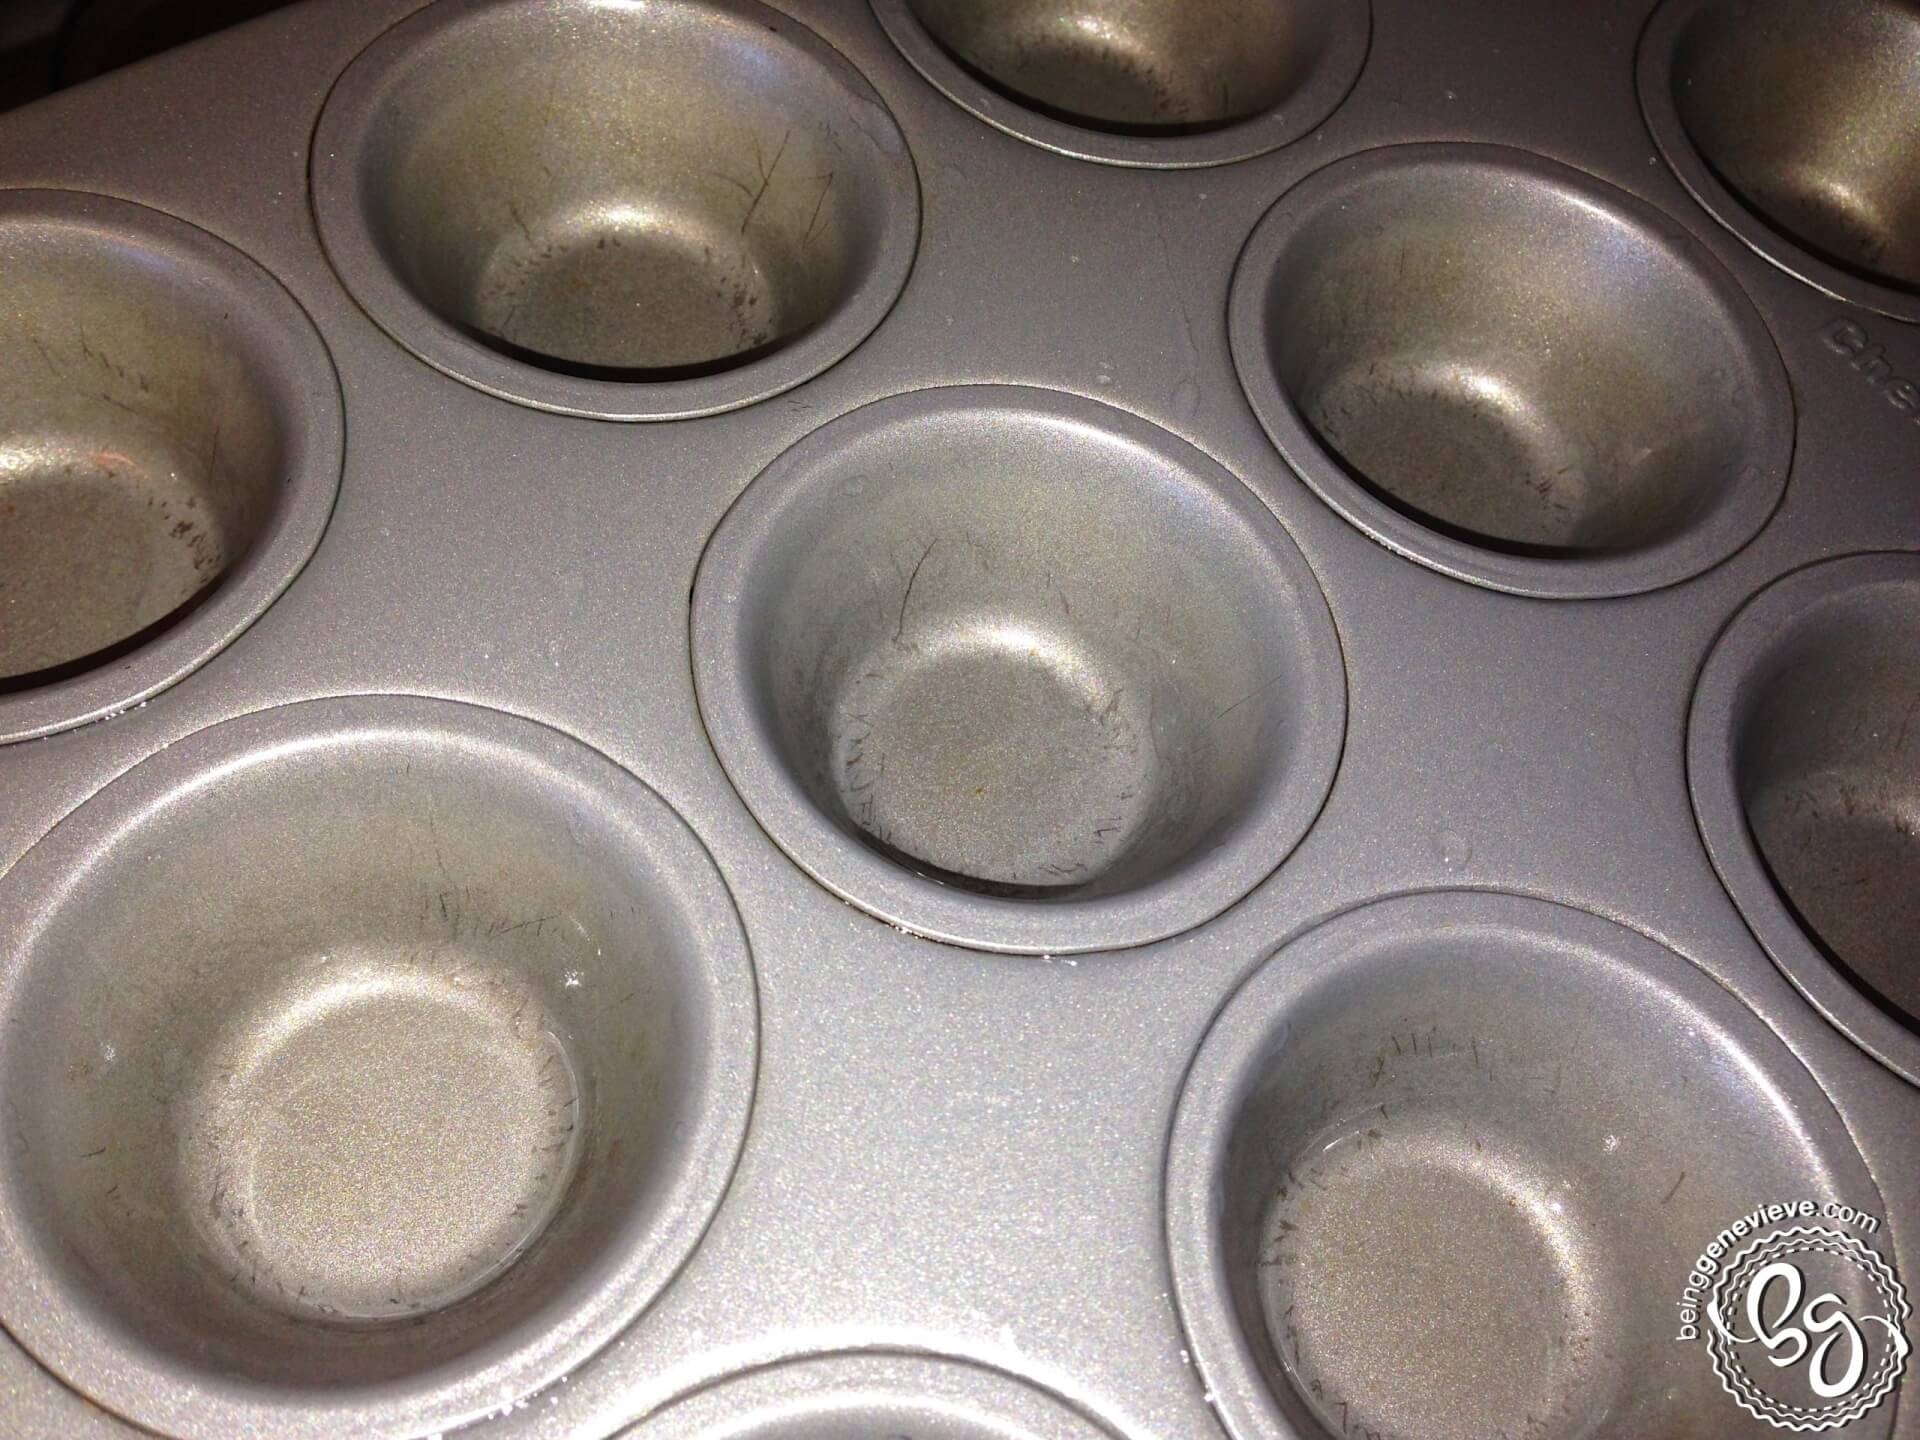 Cleaning Muffin Tins